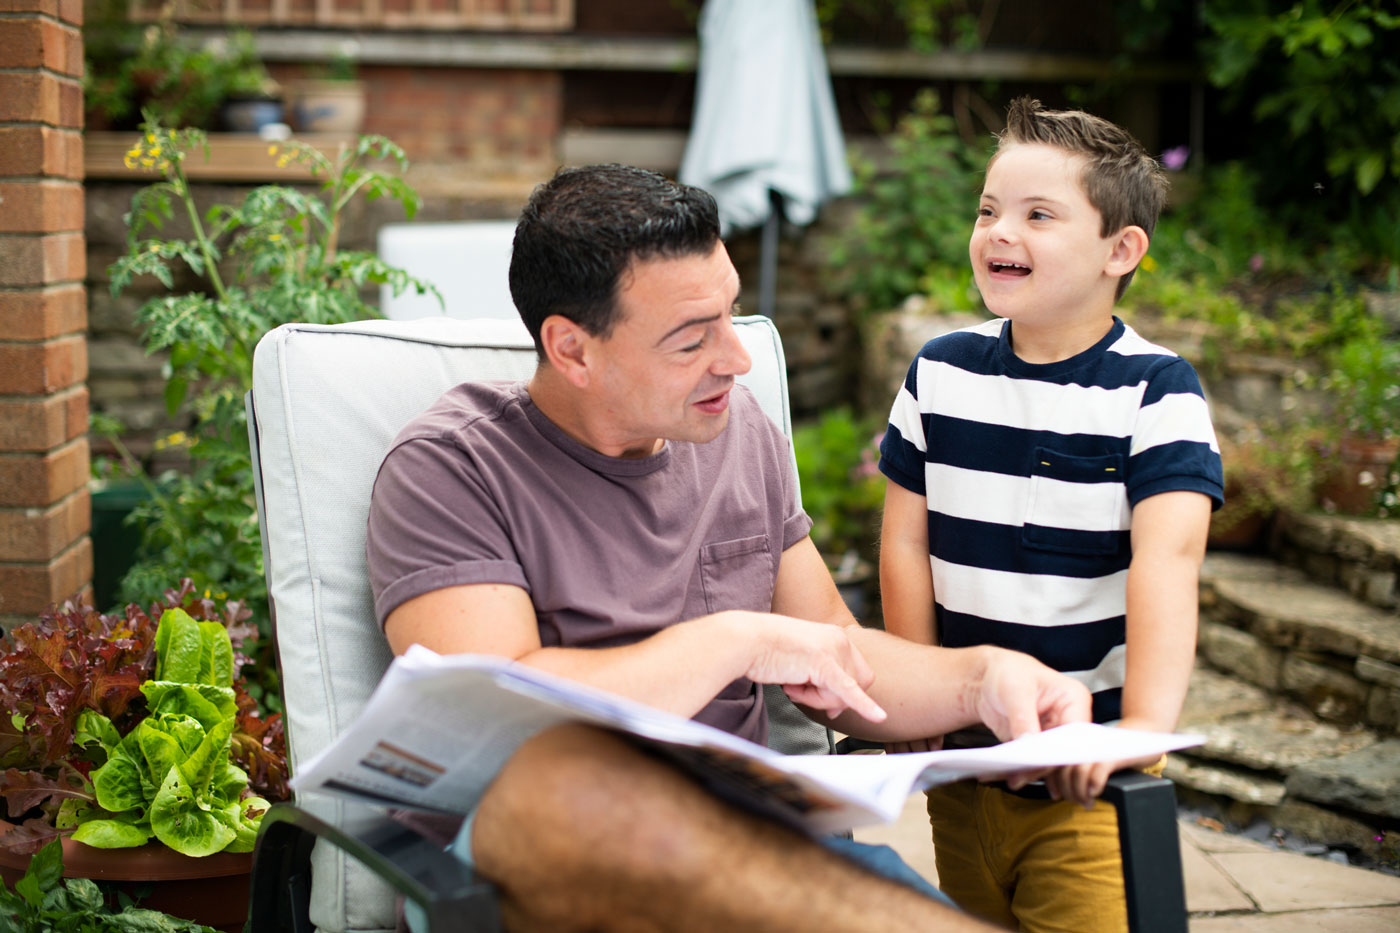 image of dad reading newspaper with son with Down Syndrome smiling next to him